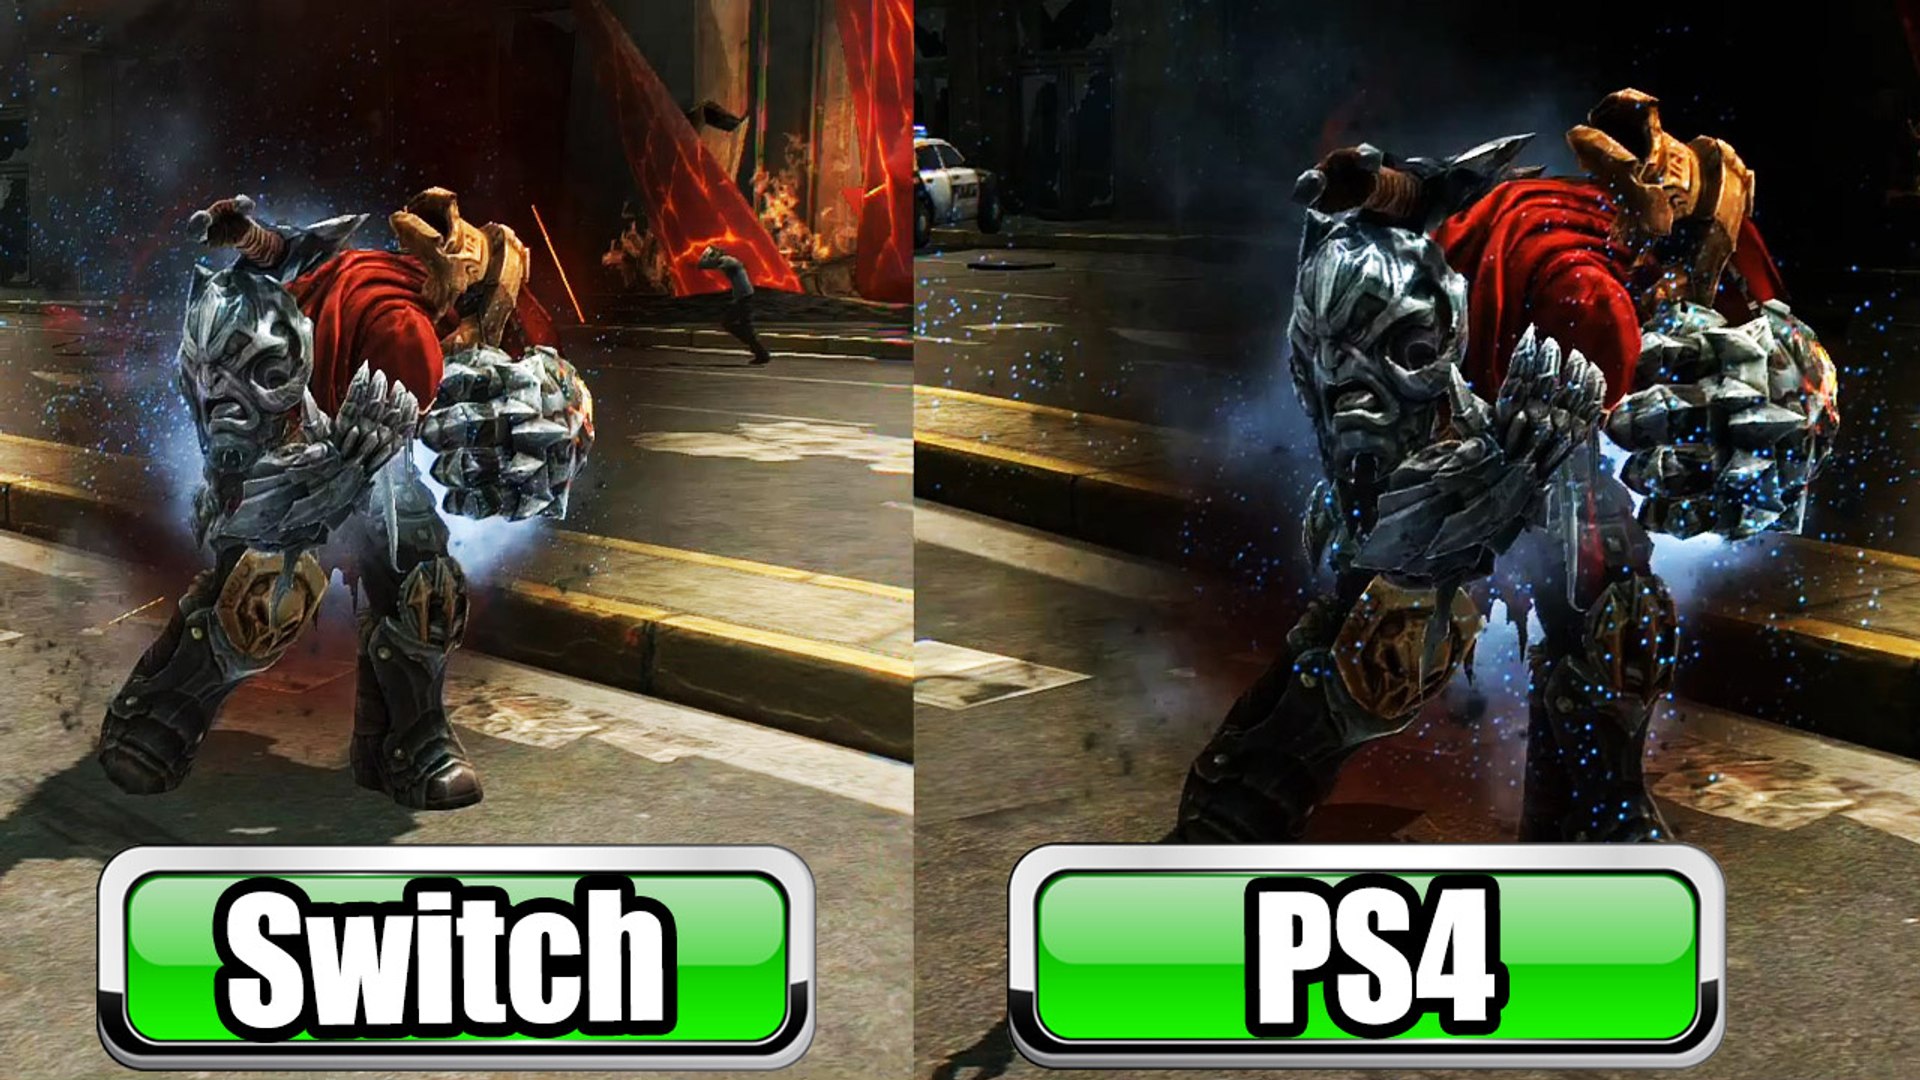 Darksiders Warmastered Edition Switch Vs Ps4 Gameplay Comparison Video Dailymotion